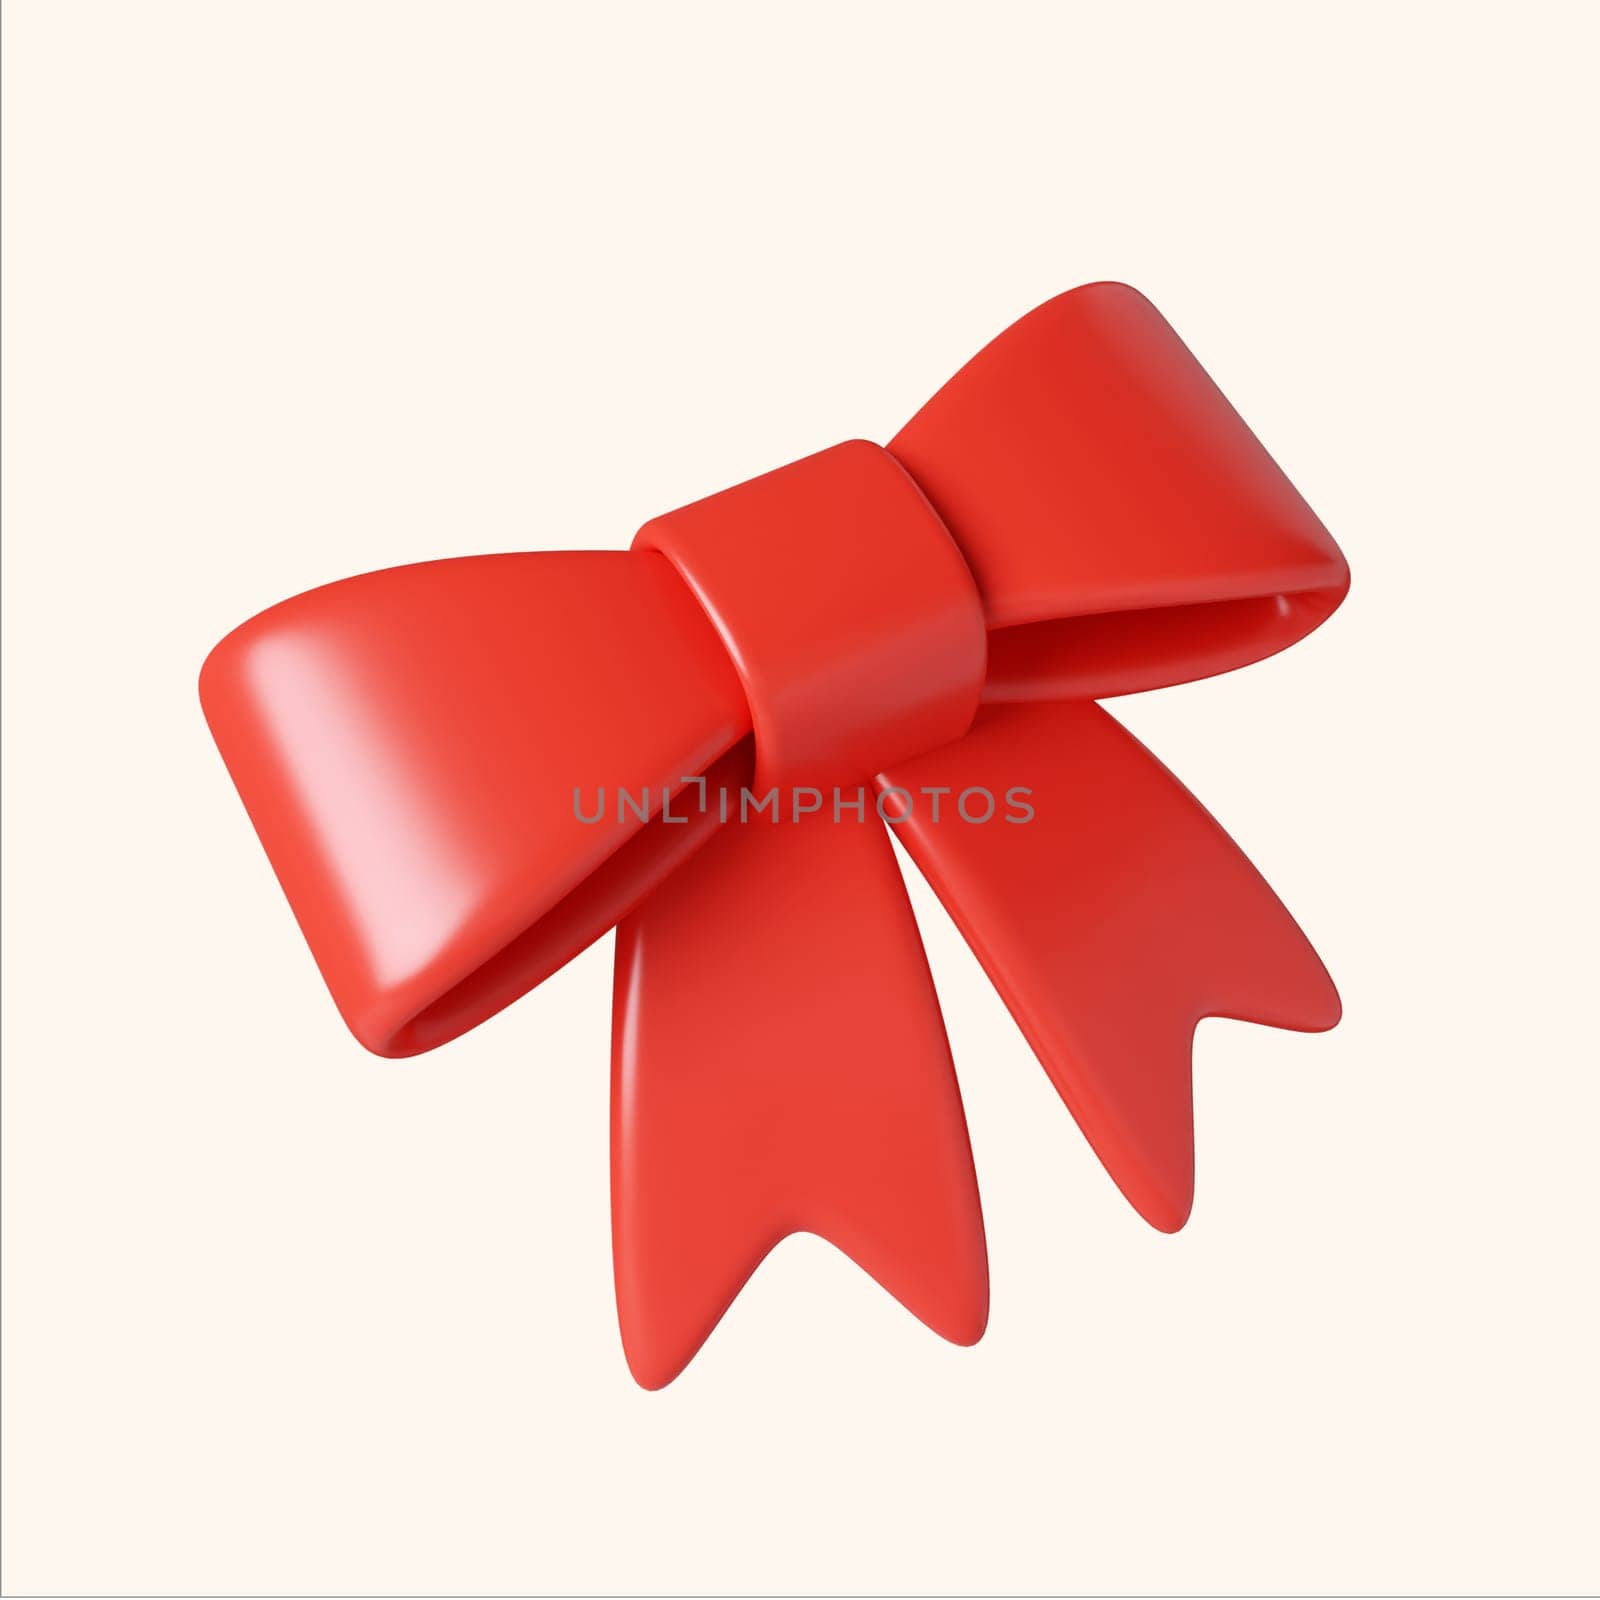 3d Christmas red bow icon. minimal decorative festive conical shape tree. New Year's holiday decor. 3d design element In cartoon style. Icon isolated on white background. 3D illustration by meepiangraphic